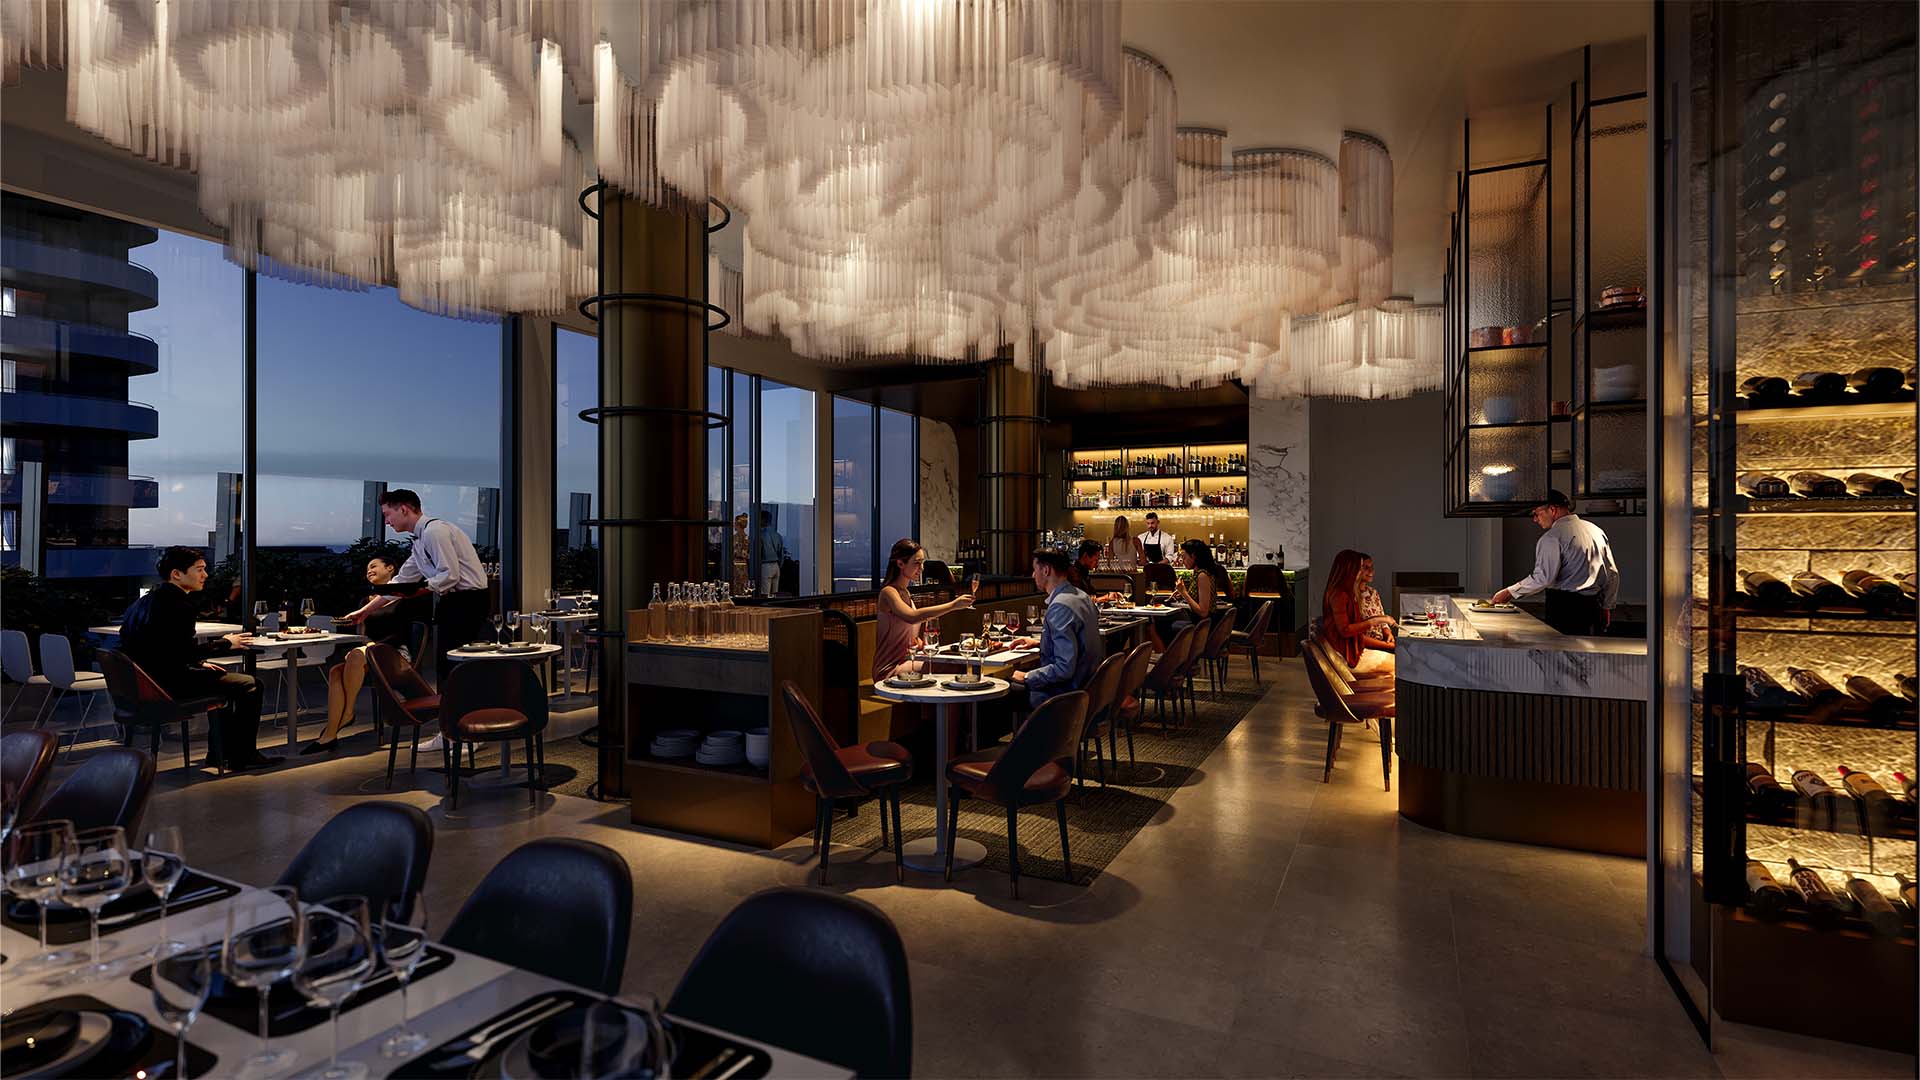 Luxurious Rooftop Restaurant Ciel Is Opening in Norwest with an Acclaimed Chef at the Helm Next Year